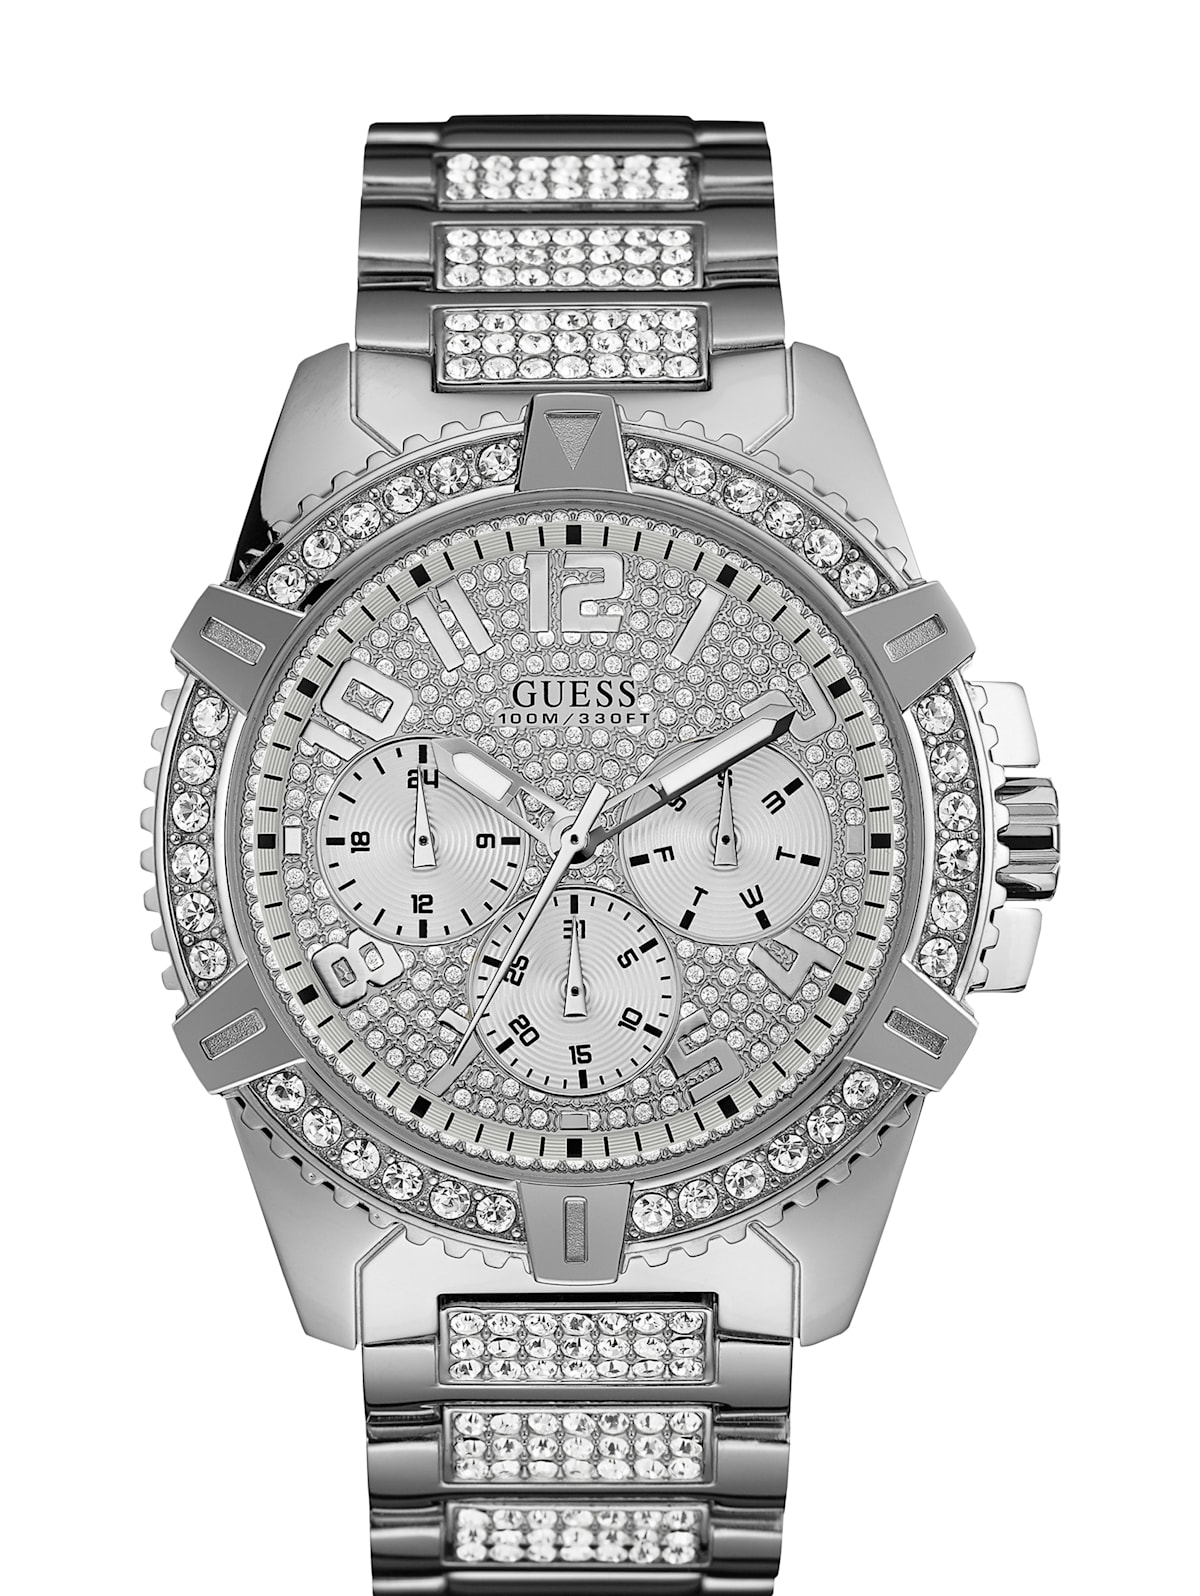 Stor vrangforestilling Bage systematisk Silver-Tone Multifunction Watch | GUESS